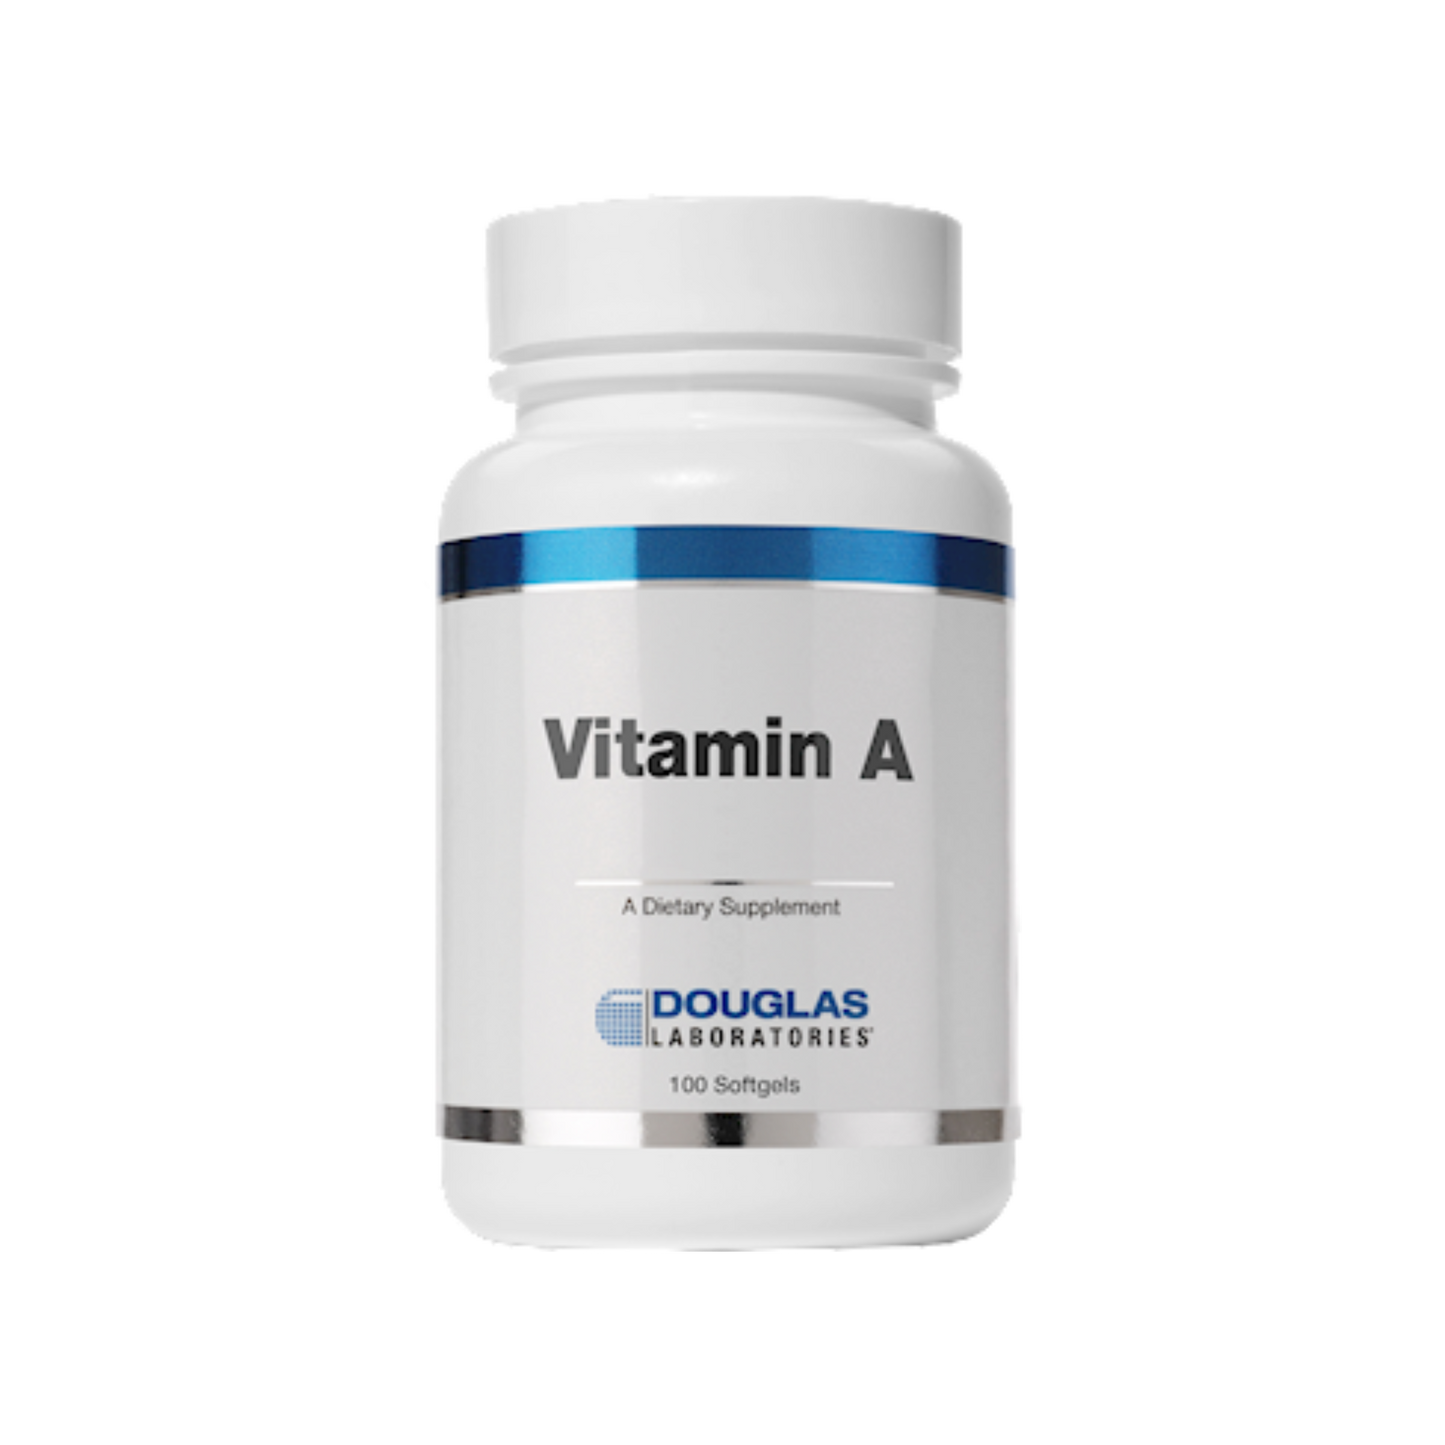 Discover the key to vibrant well-being with Douglas Laboratories Vitamin A. Our meticulously crafted supplement is designed to help you achieve optimal health by addressing various essential functions in your body. Vitamin A plays a vital role in maintaining healthy vision, supporting your immune system, and promoting overall wellness.